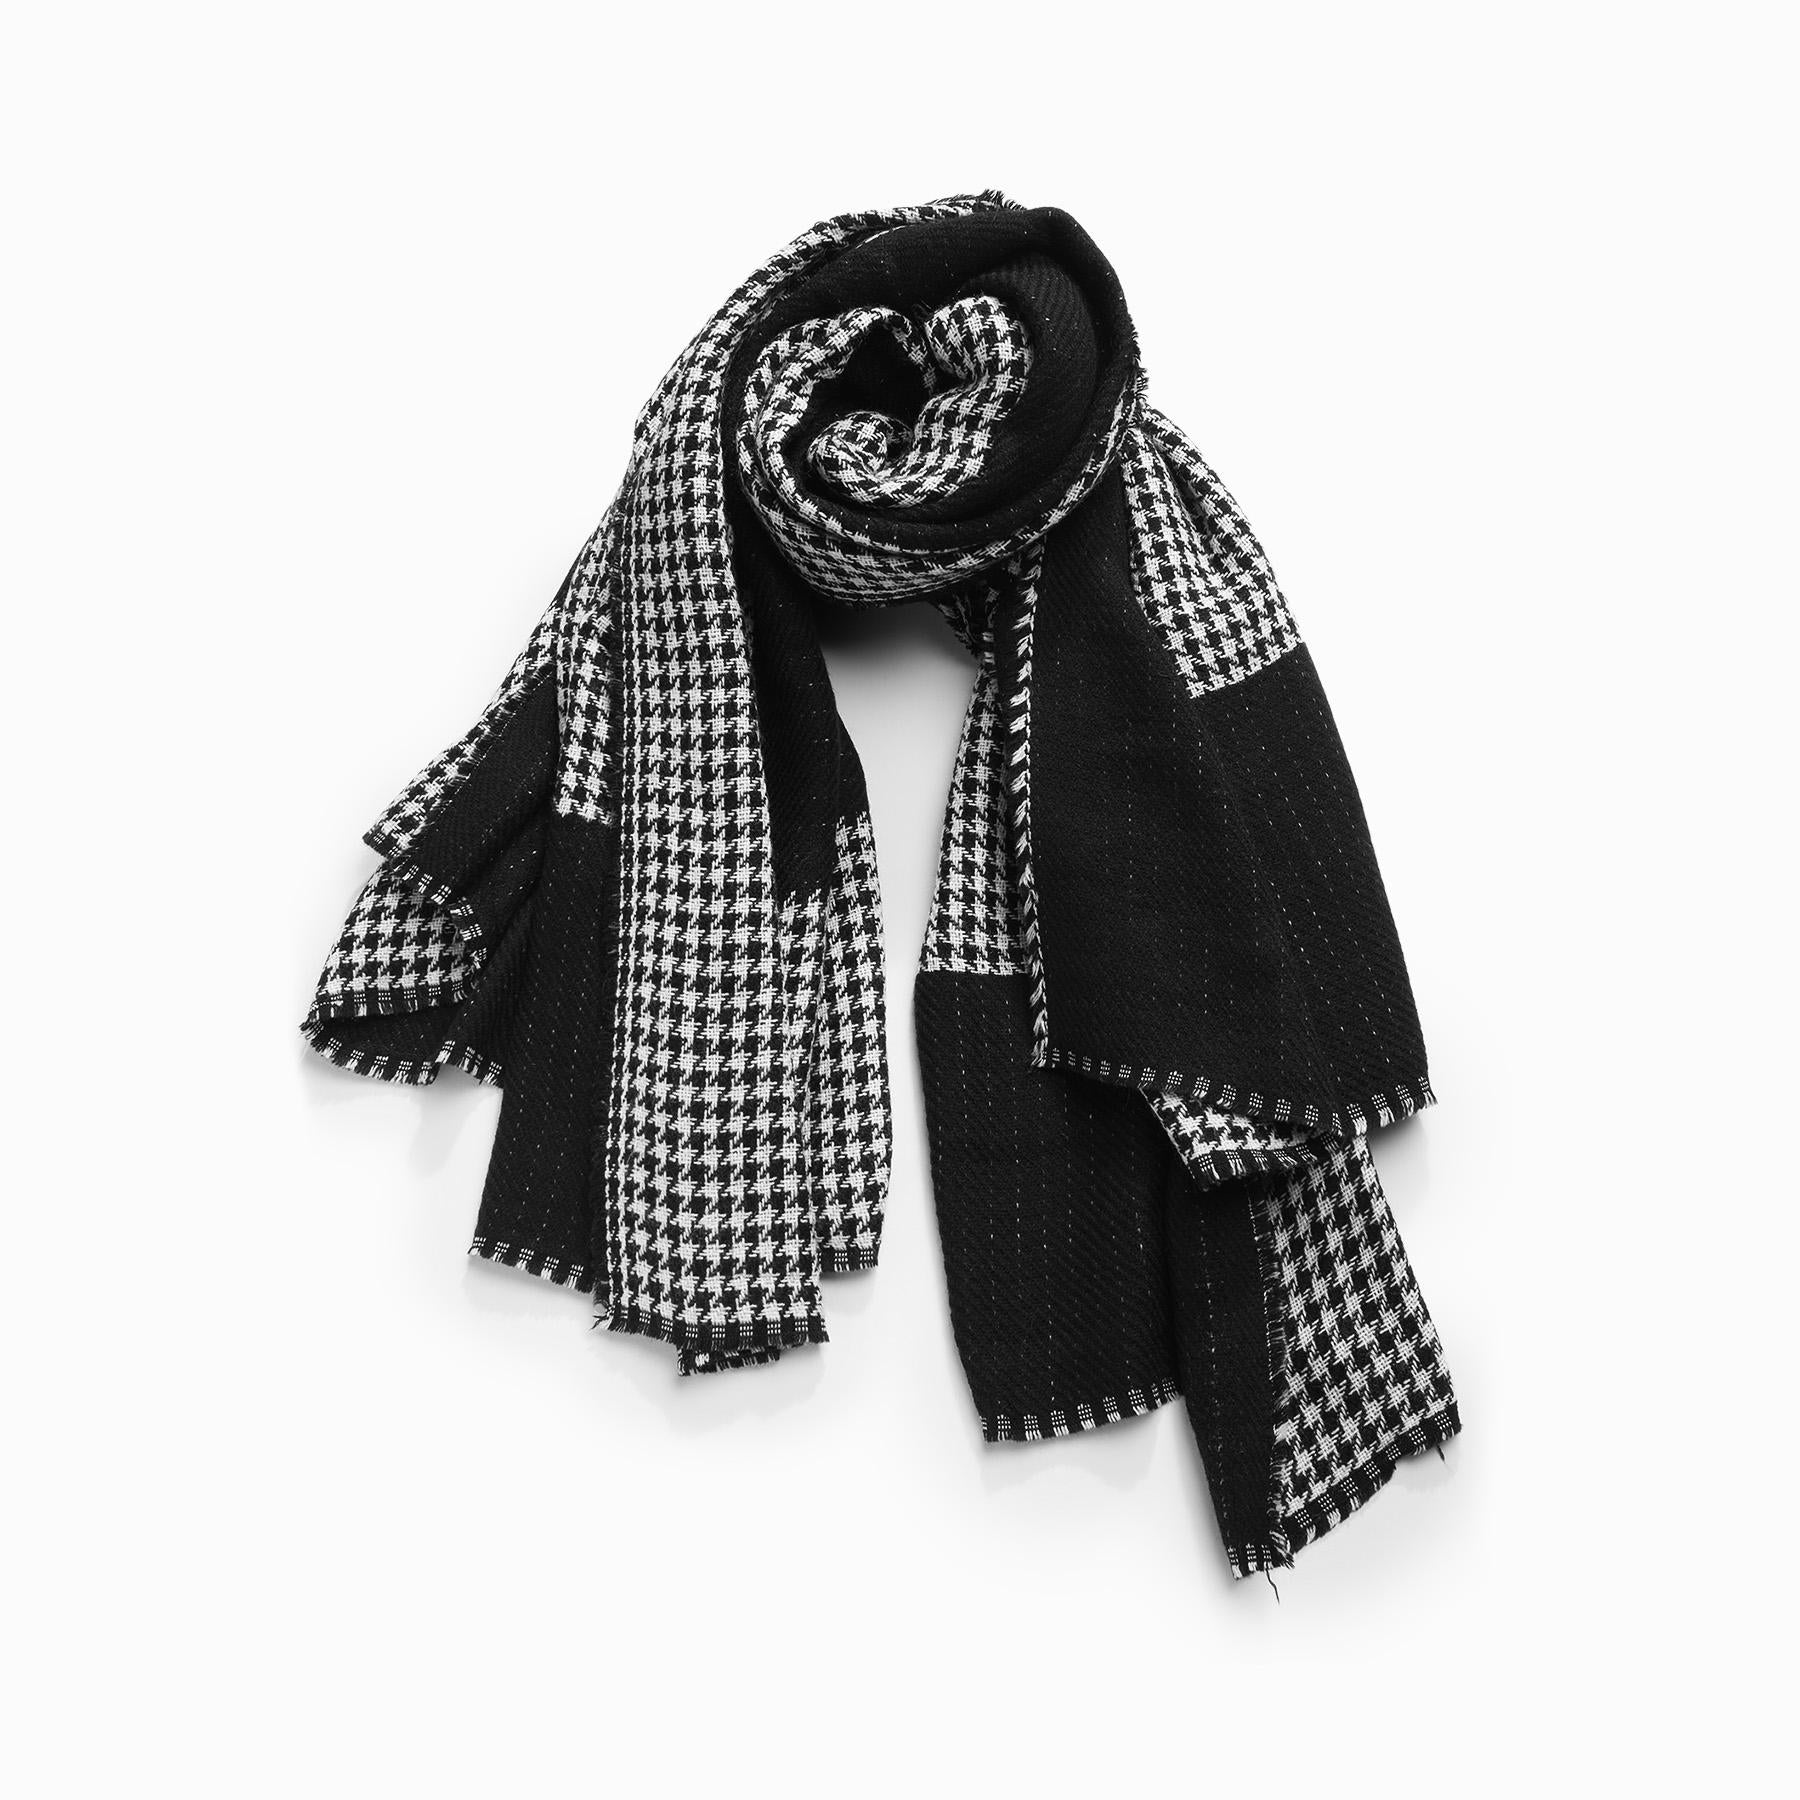 Monochrome Houndstooth Reversible Scarf